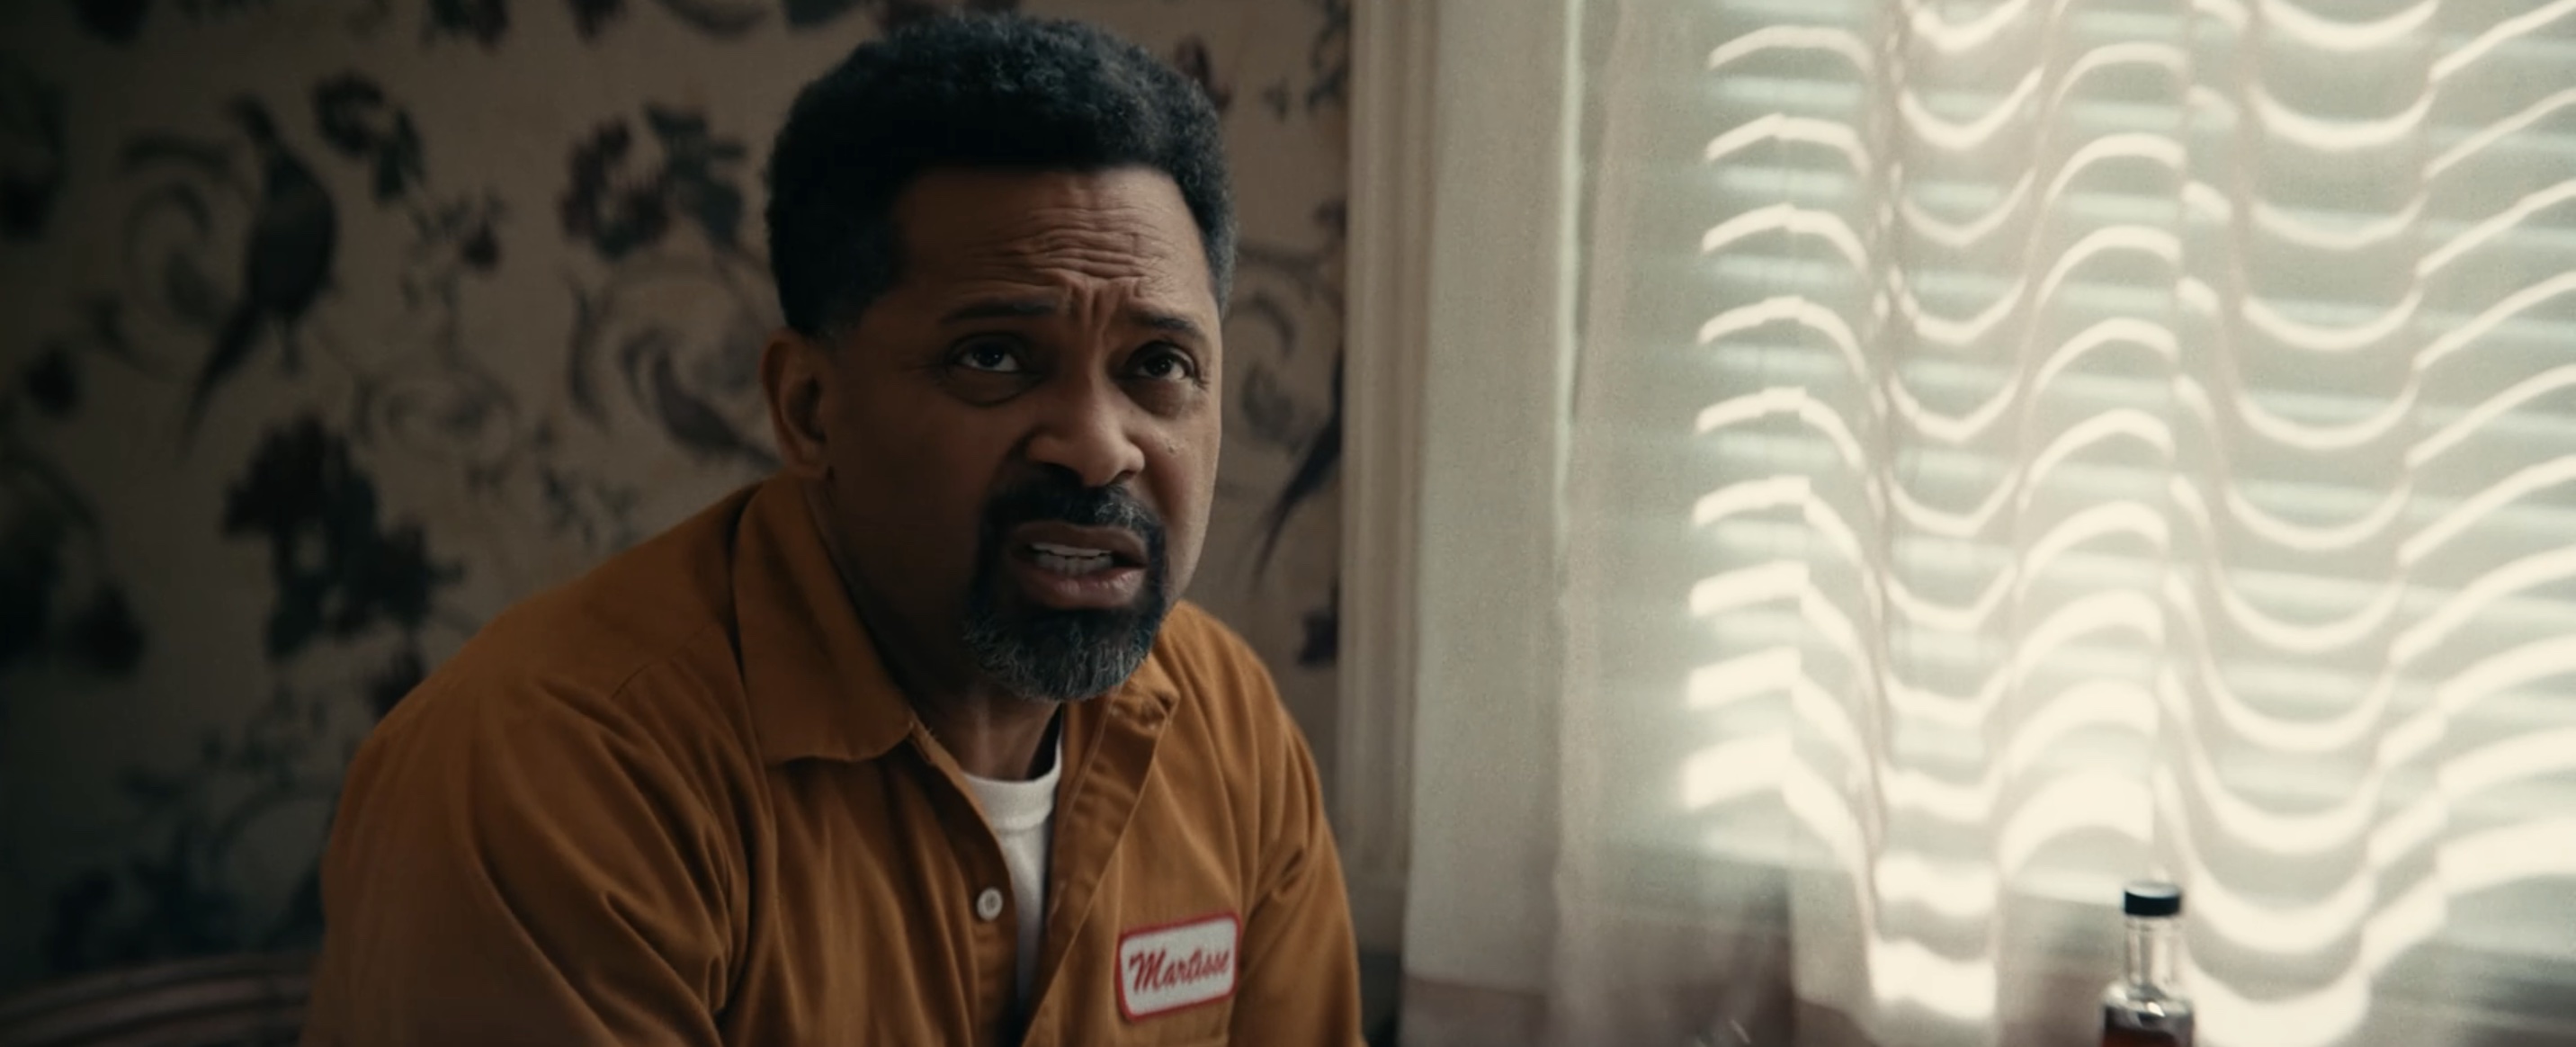 I'm a Virgo Cast on Amazon - Mike Epps as Martisse